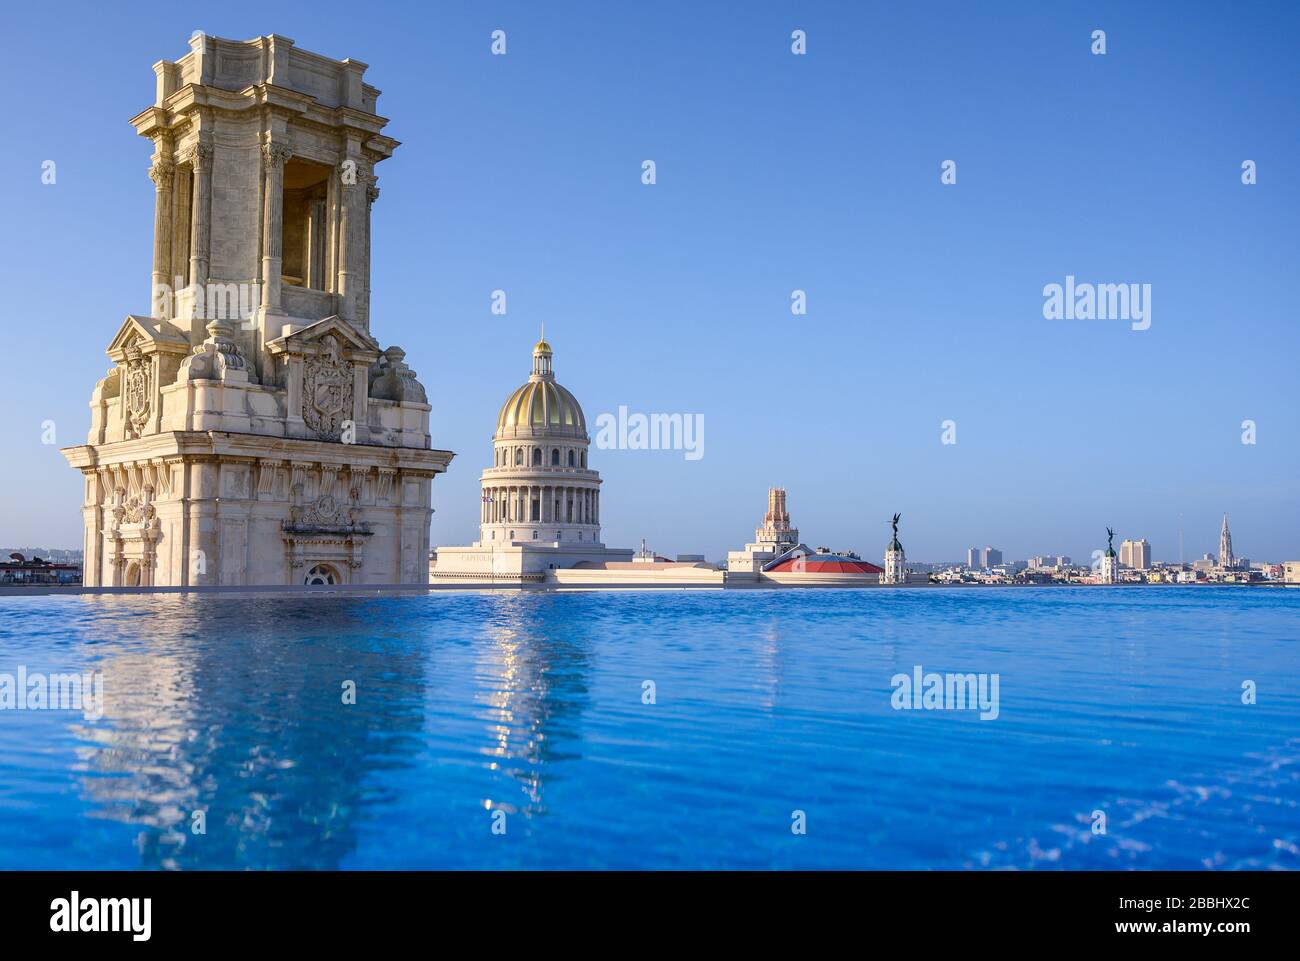 Rooftop view with  infinity pool of El Capitolio, or the National Capitol Building, and Museo Nacional de Bellas Artes, from roof of Gran Hotel Manzana Kempinski, Havana, Cuba Stock Photo